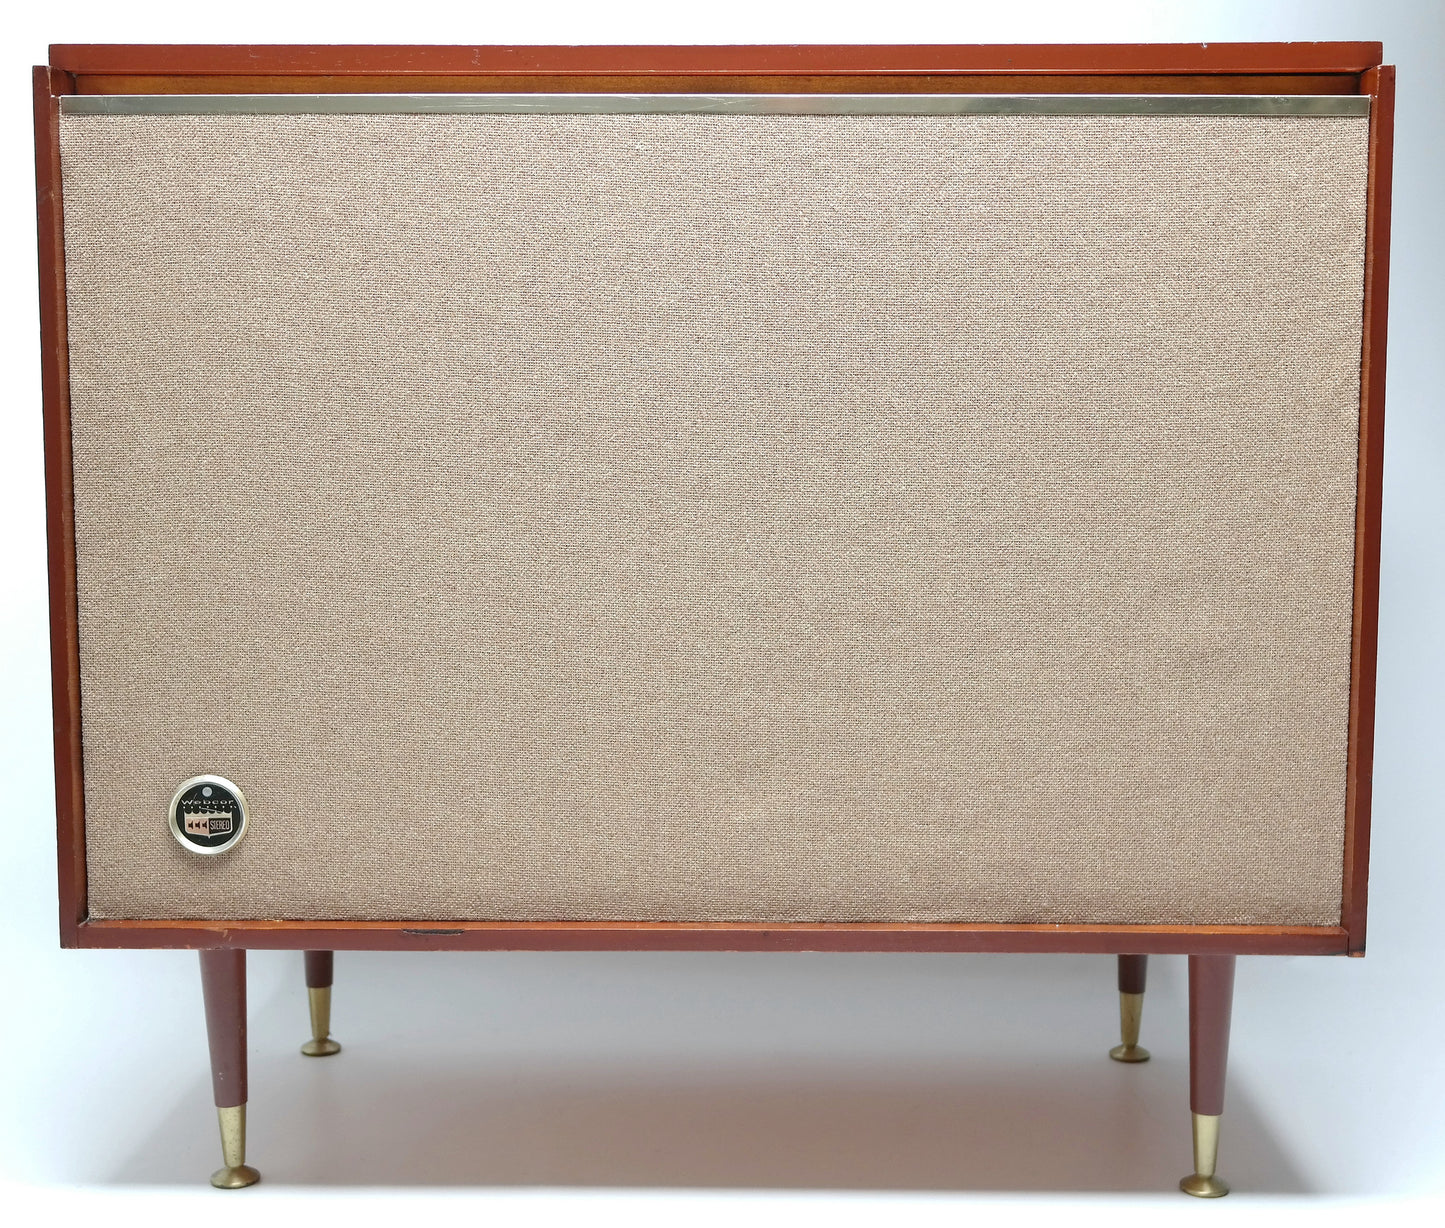 Mid Century Modern STEREO CONSOLE- 50's - Mid Century Webcor Concerto Record Player Changer - Bluetooth - AM FM The Vintedge Co.